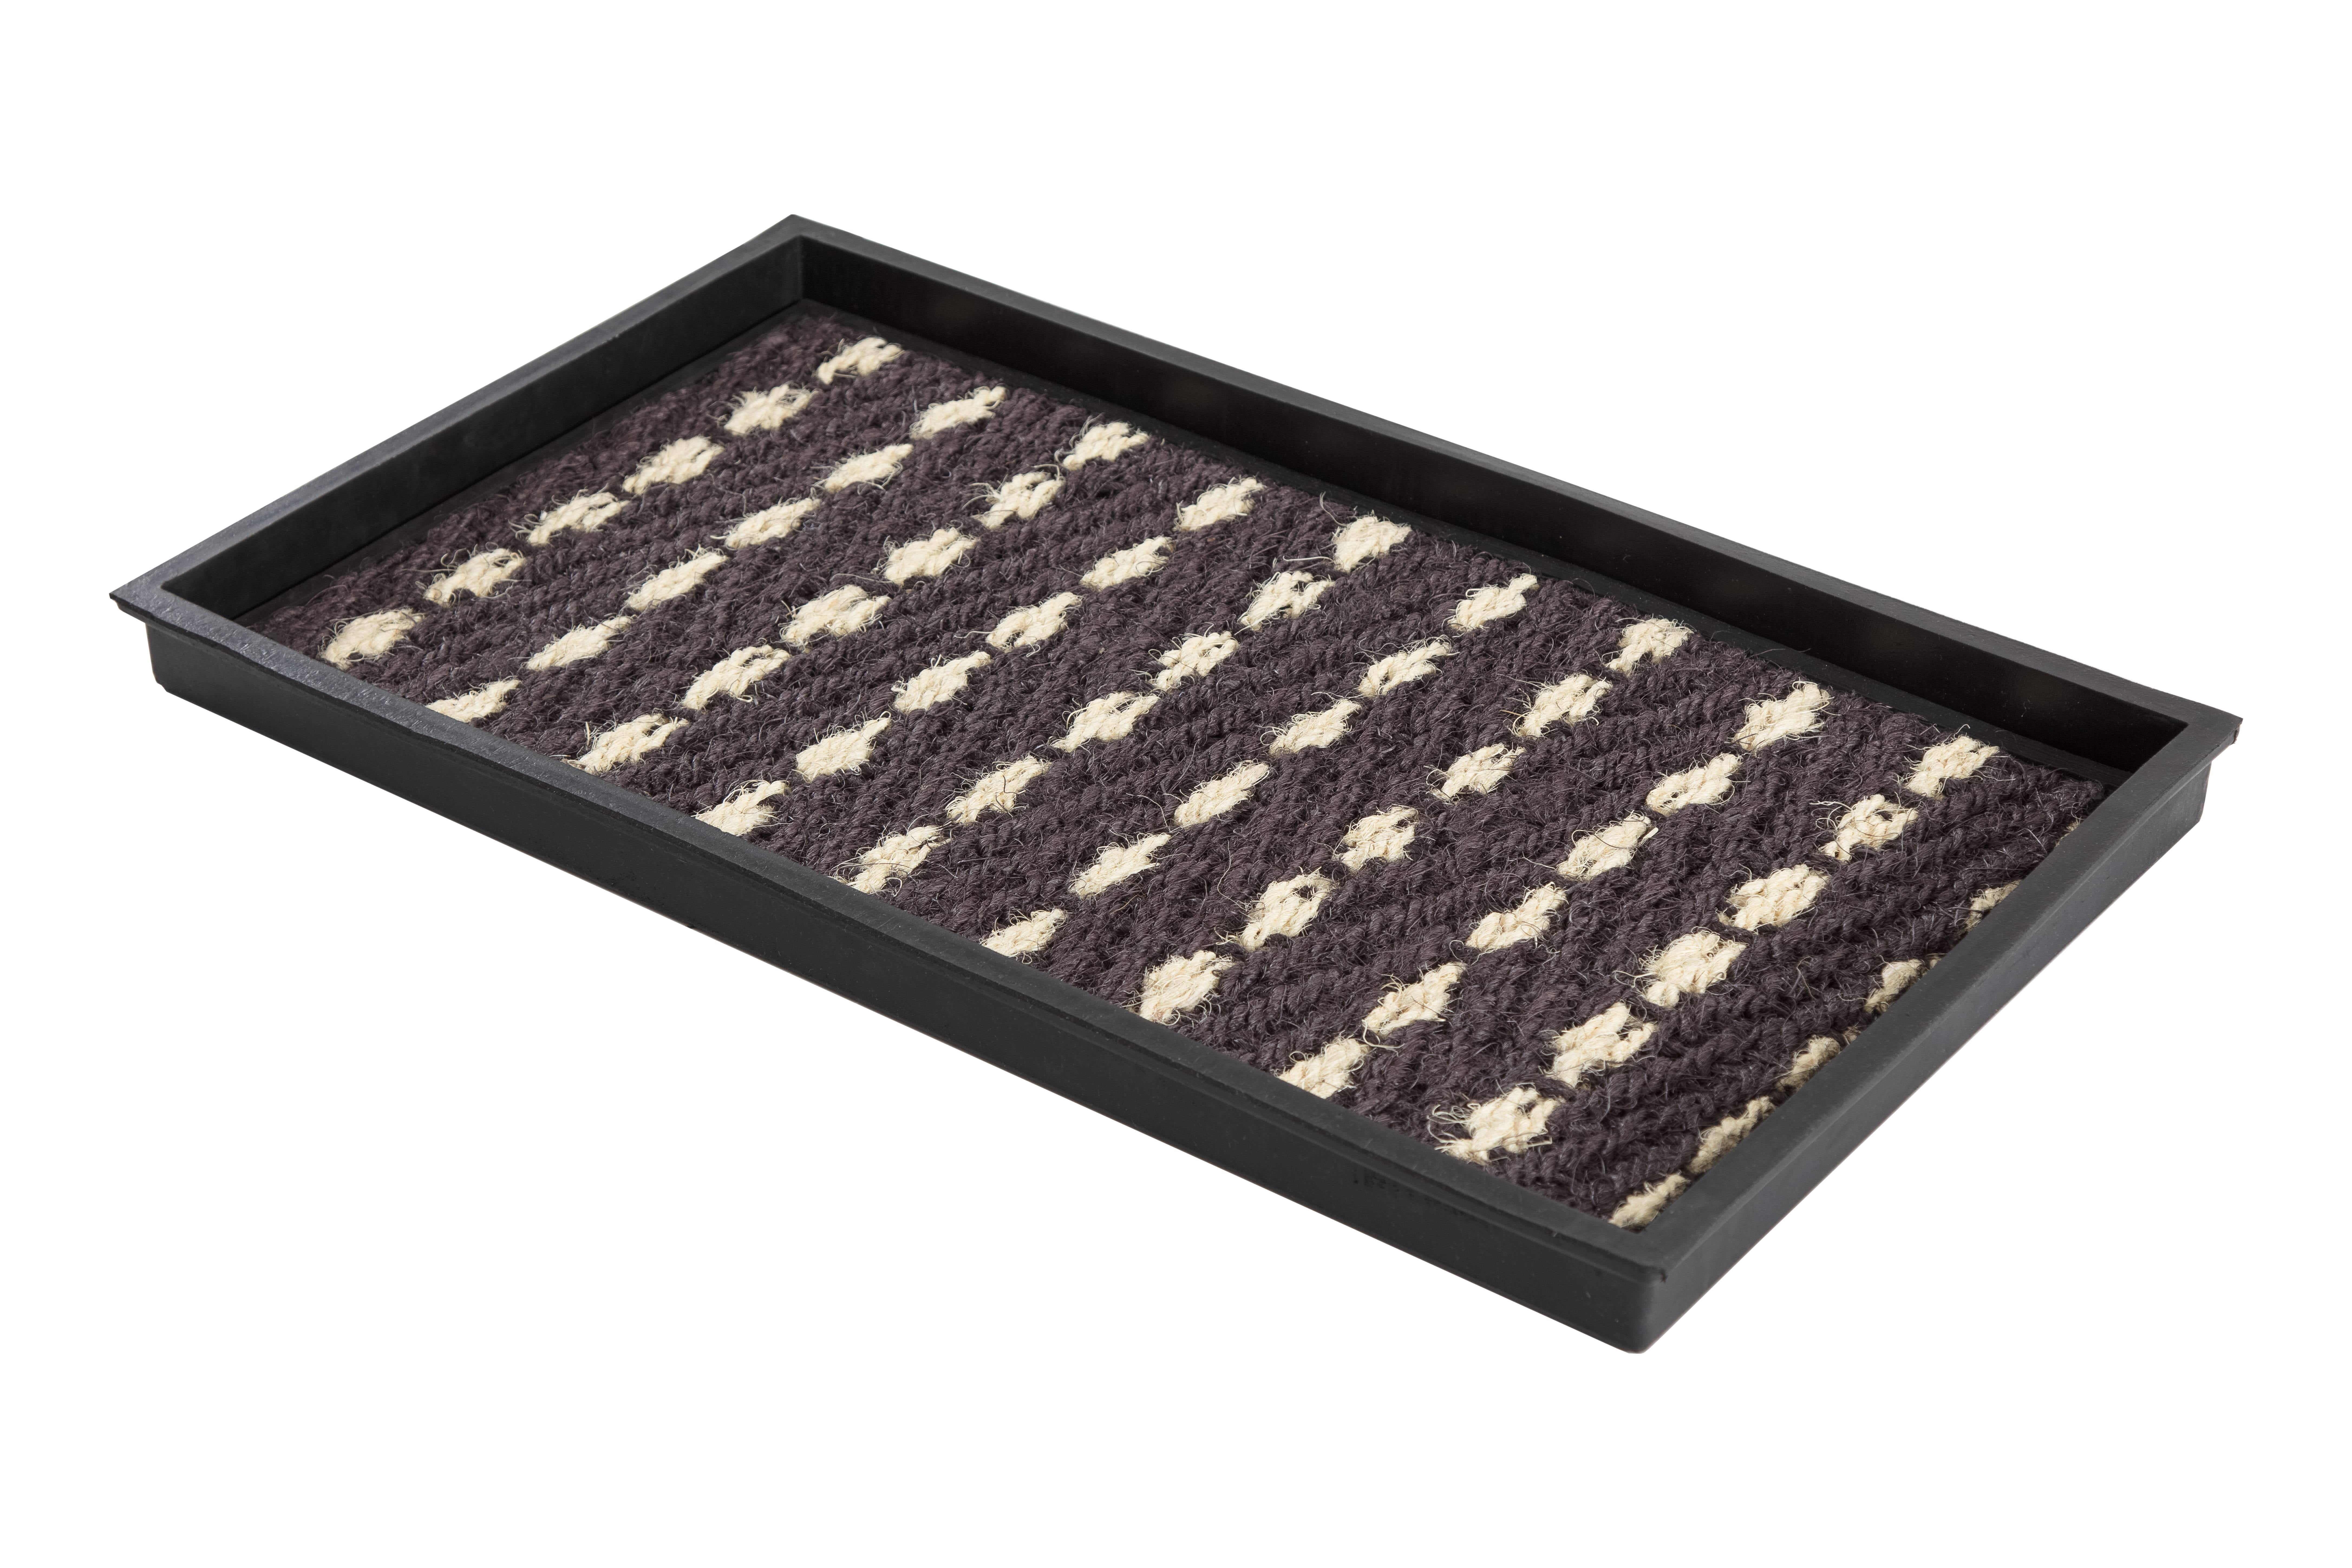 Anji Mountain Natural & Recycled Rubber Boot Tray with Gray & Ivory Coir Insert